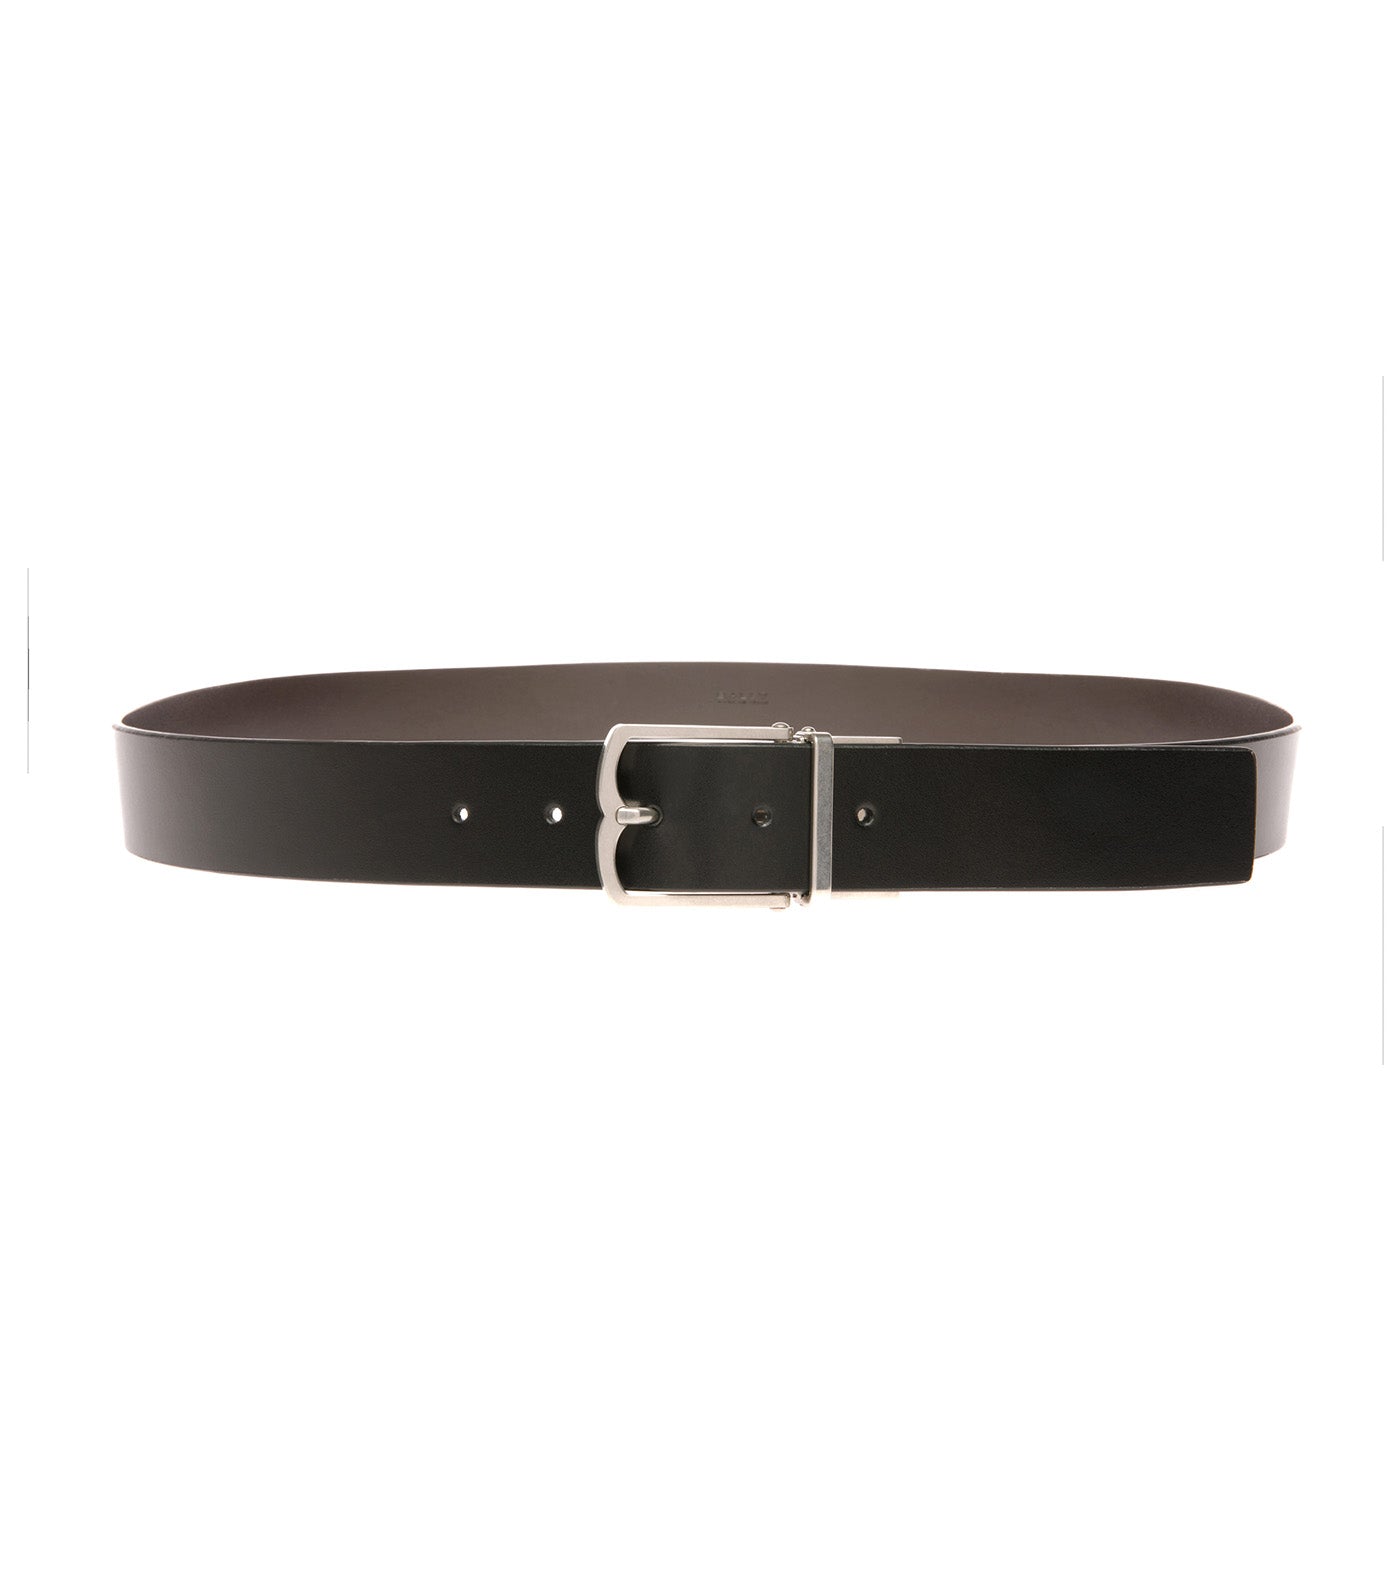 Country 35mm Adjustable and Reversible Belt Black